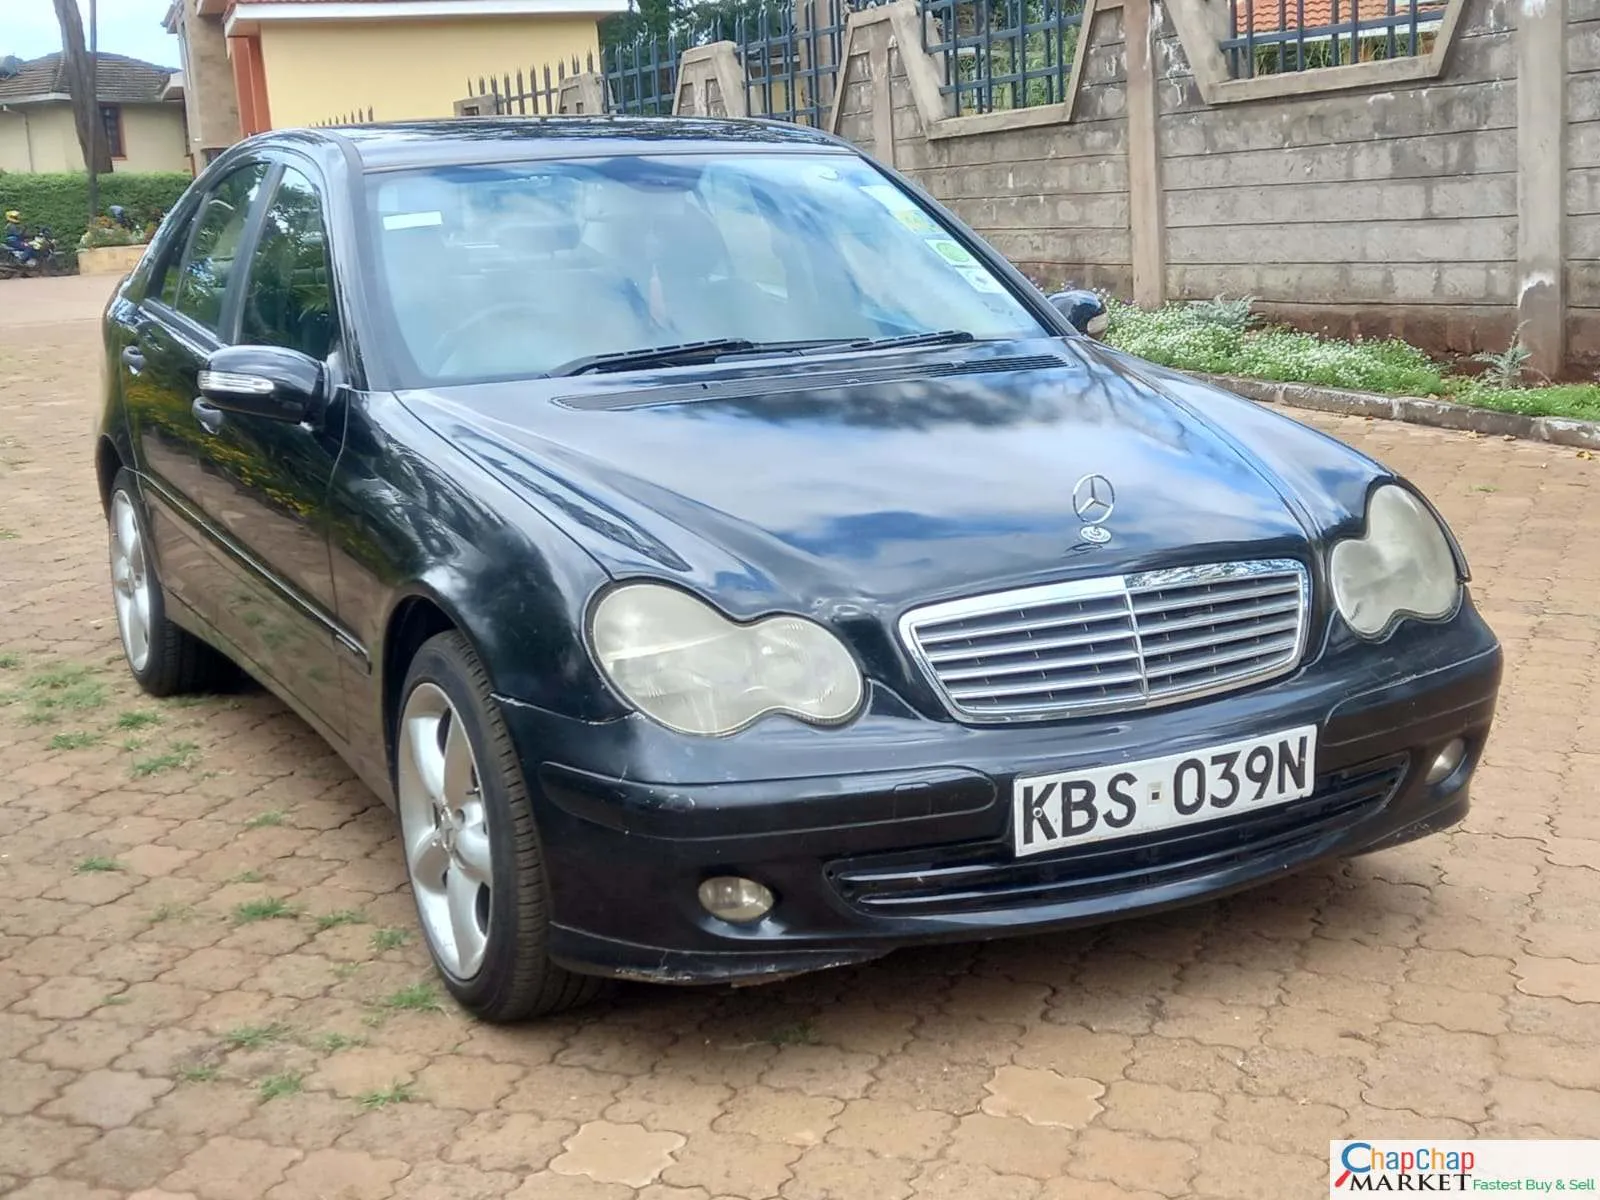 Cars Cars For Sale-Mercedes Benz C180 QUICK SALE You Pay 30% DEPOSIT Trade in OK hire purchase installments c180 for sale in kenya 13